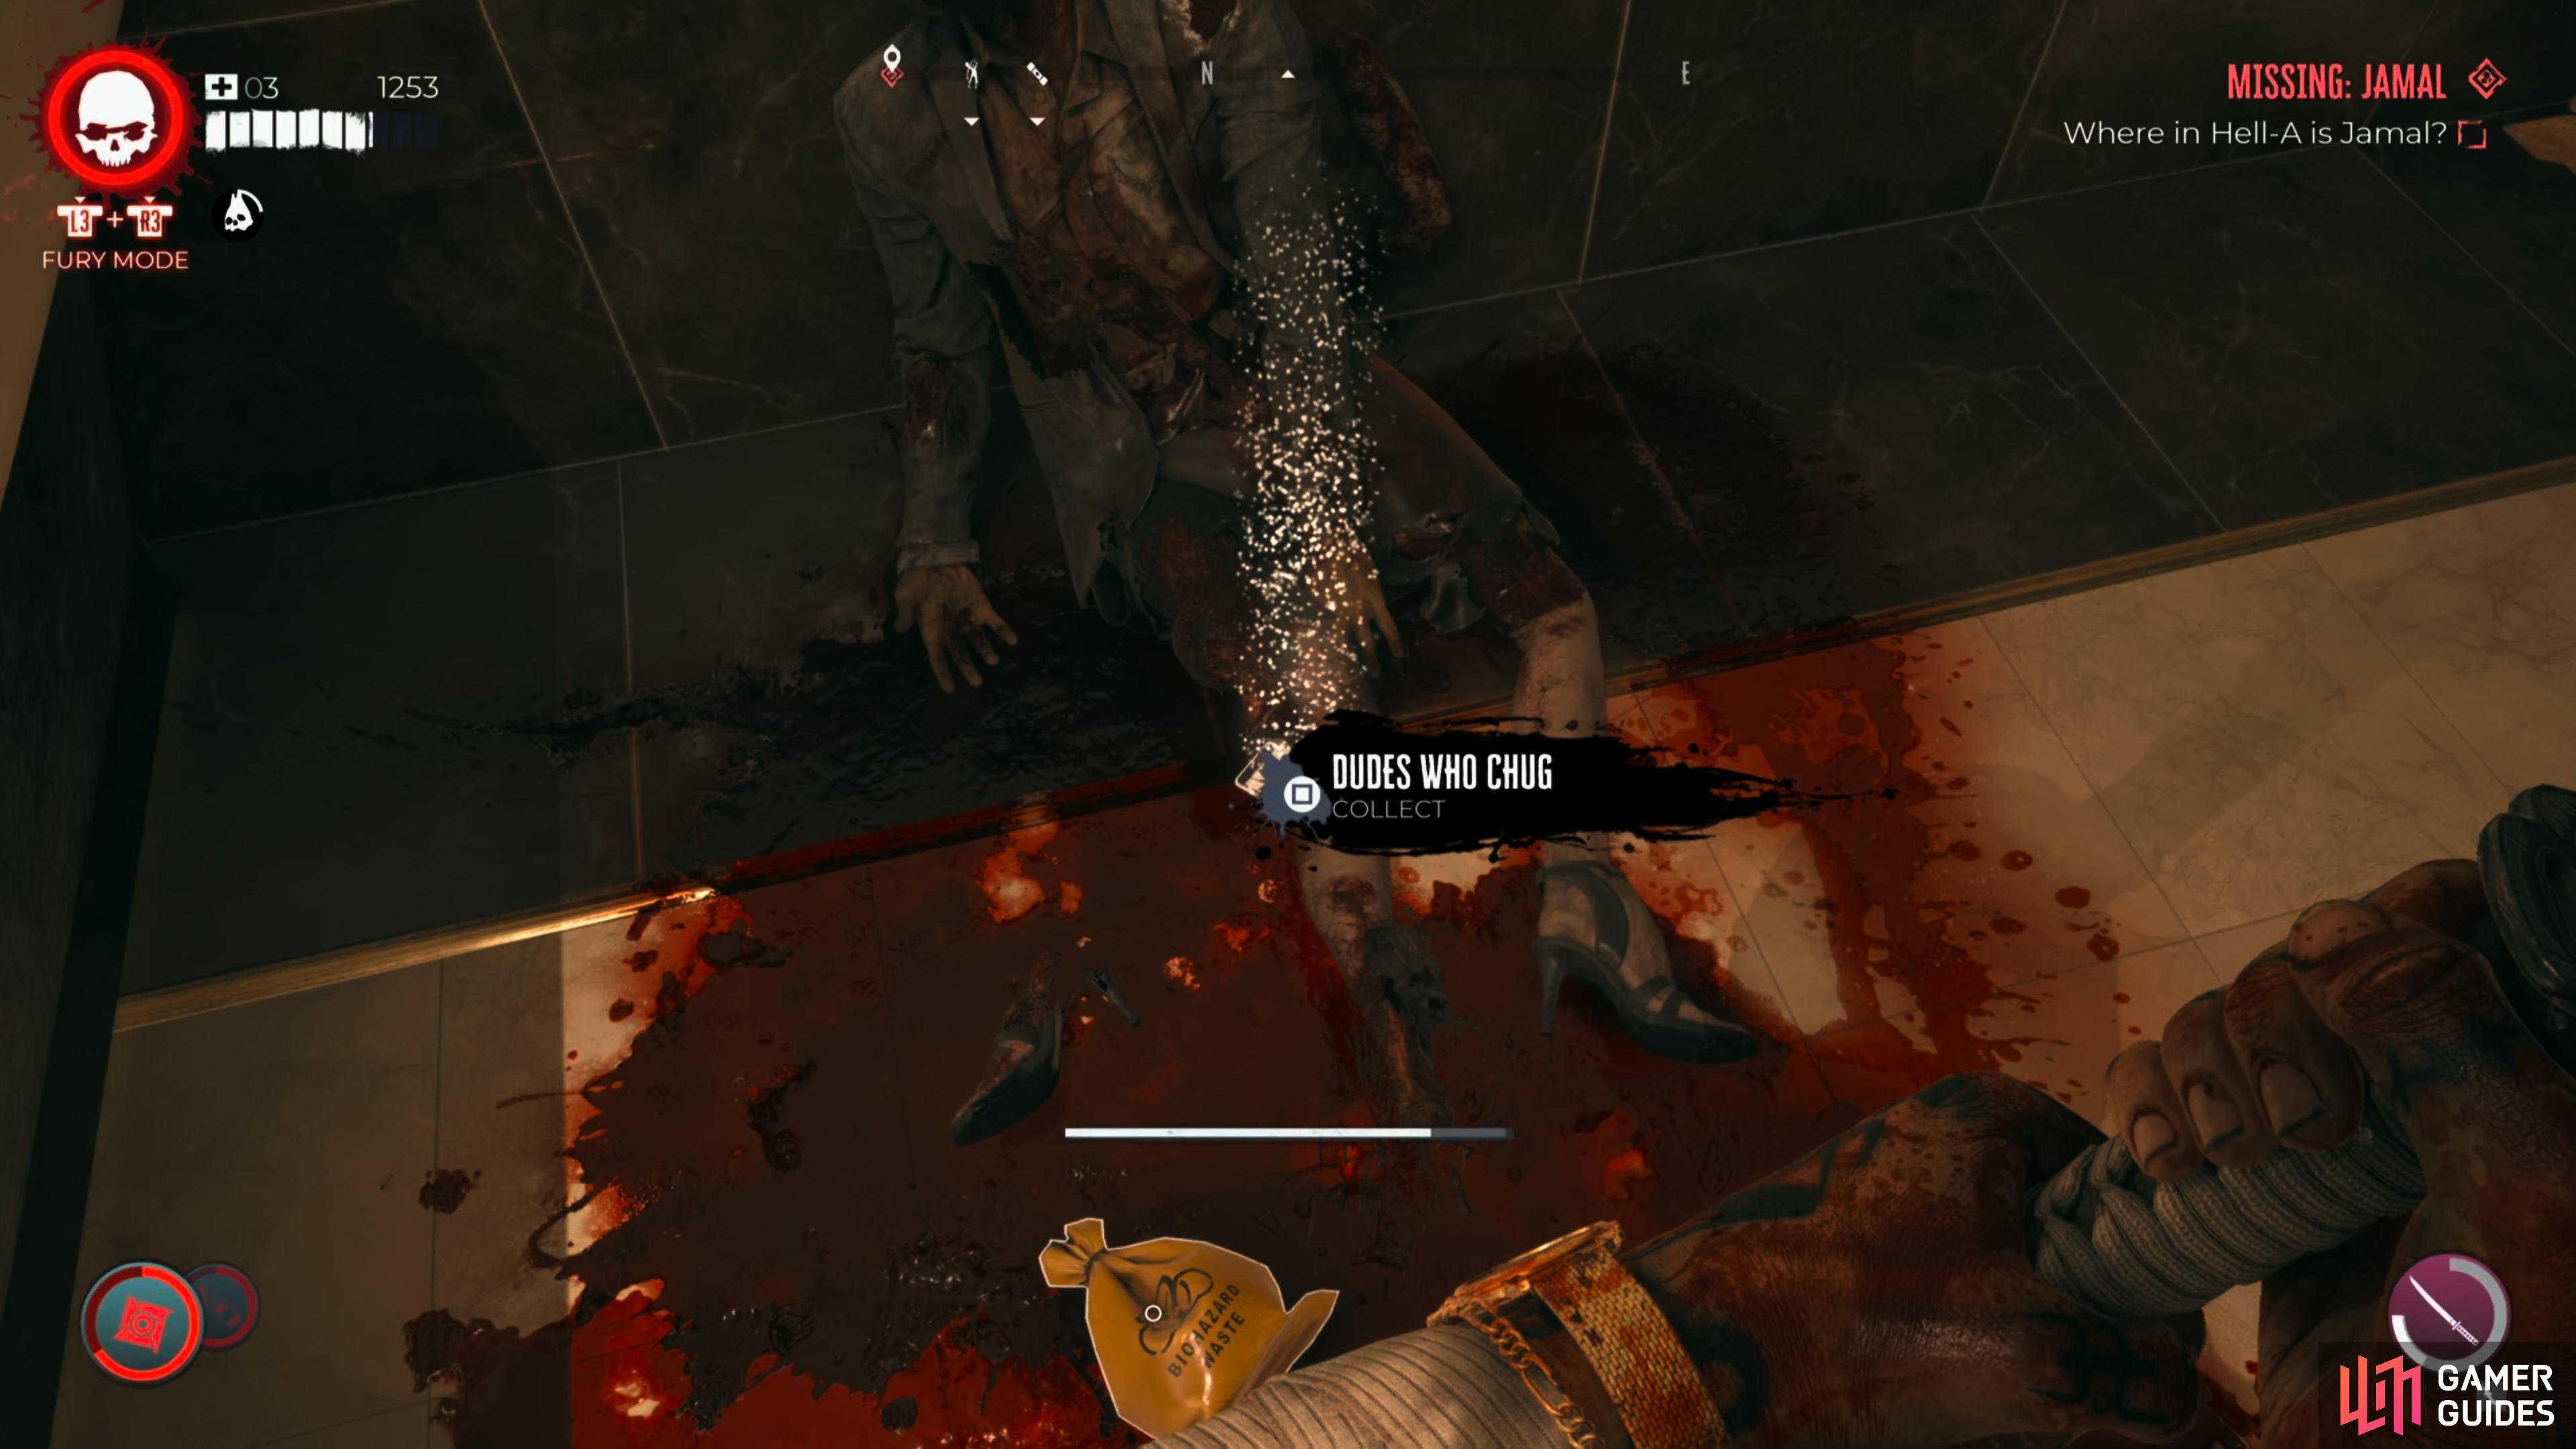 Grab the note near the corpses feet.